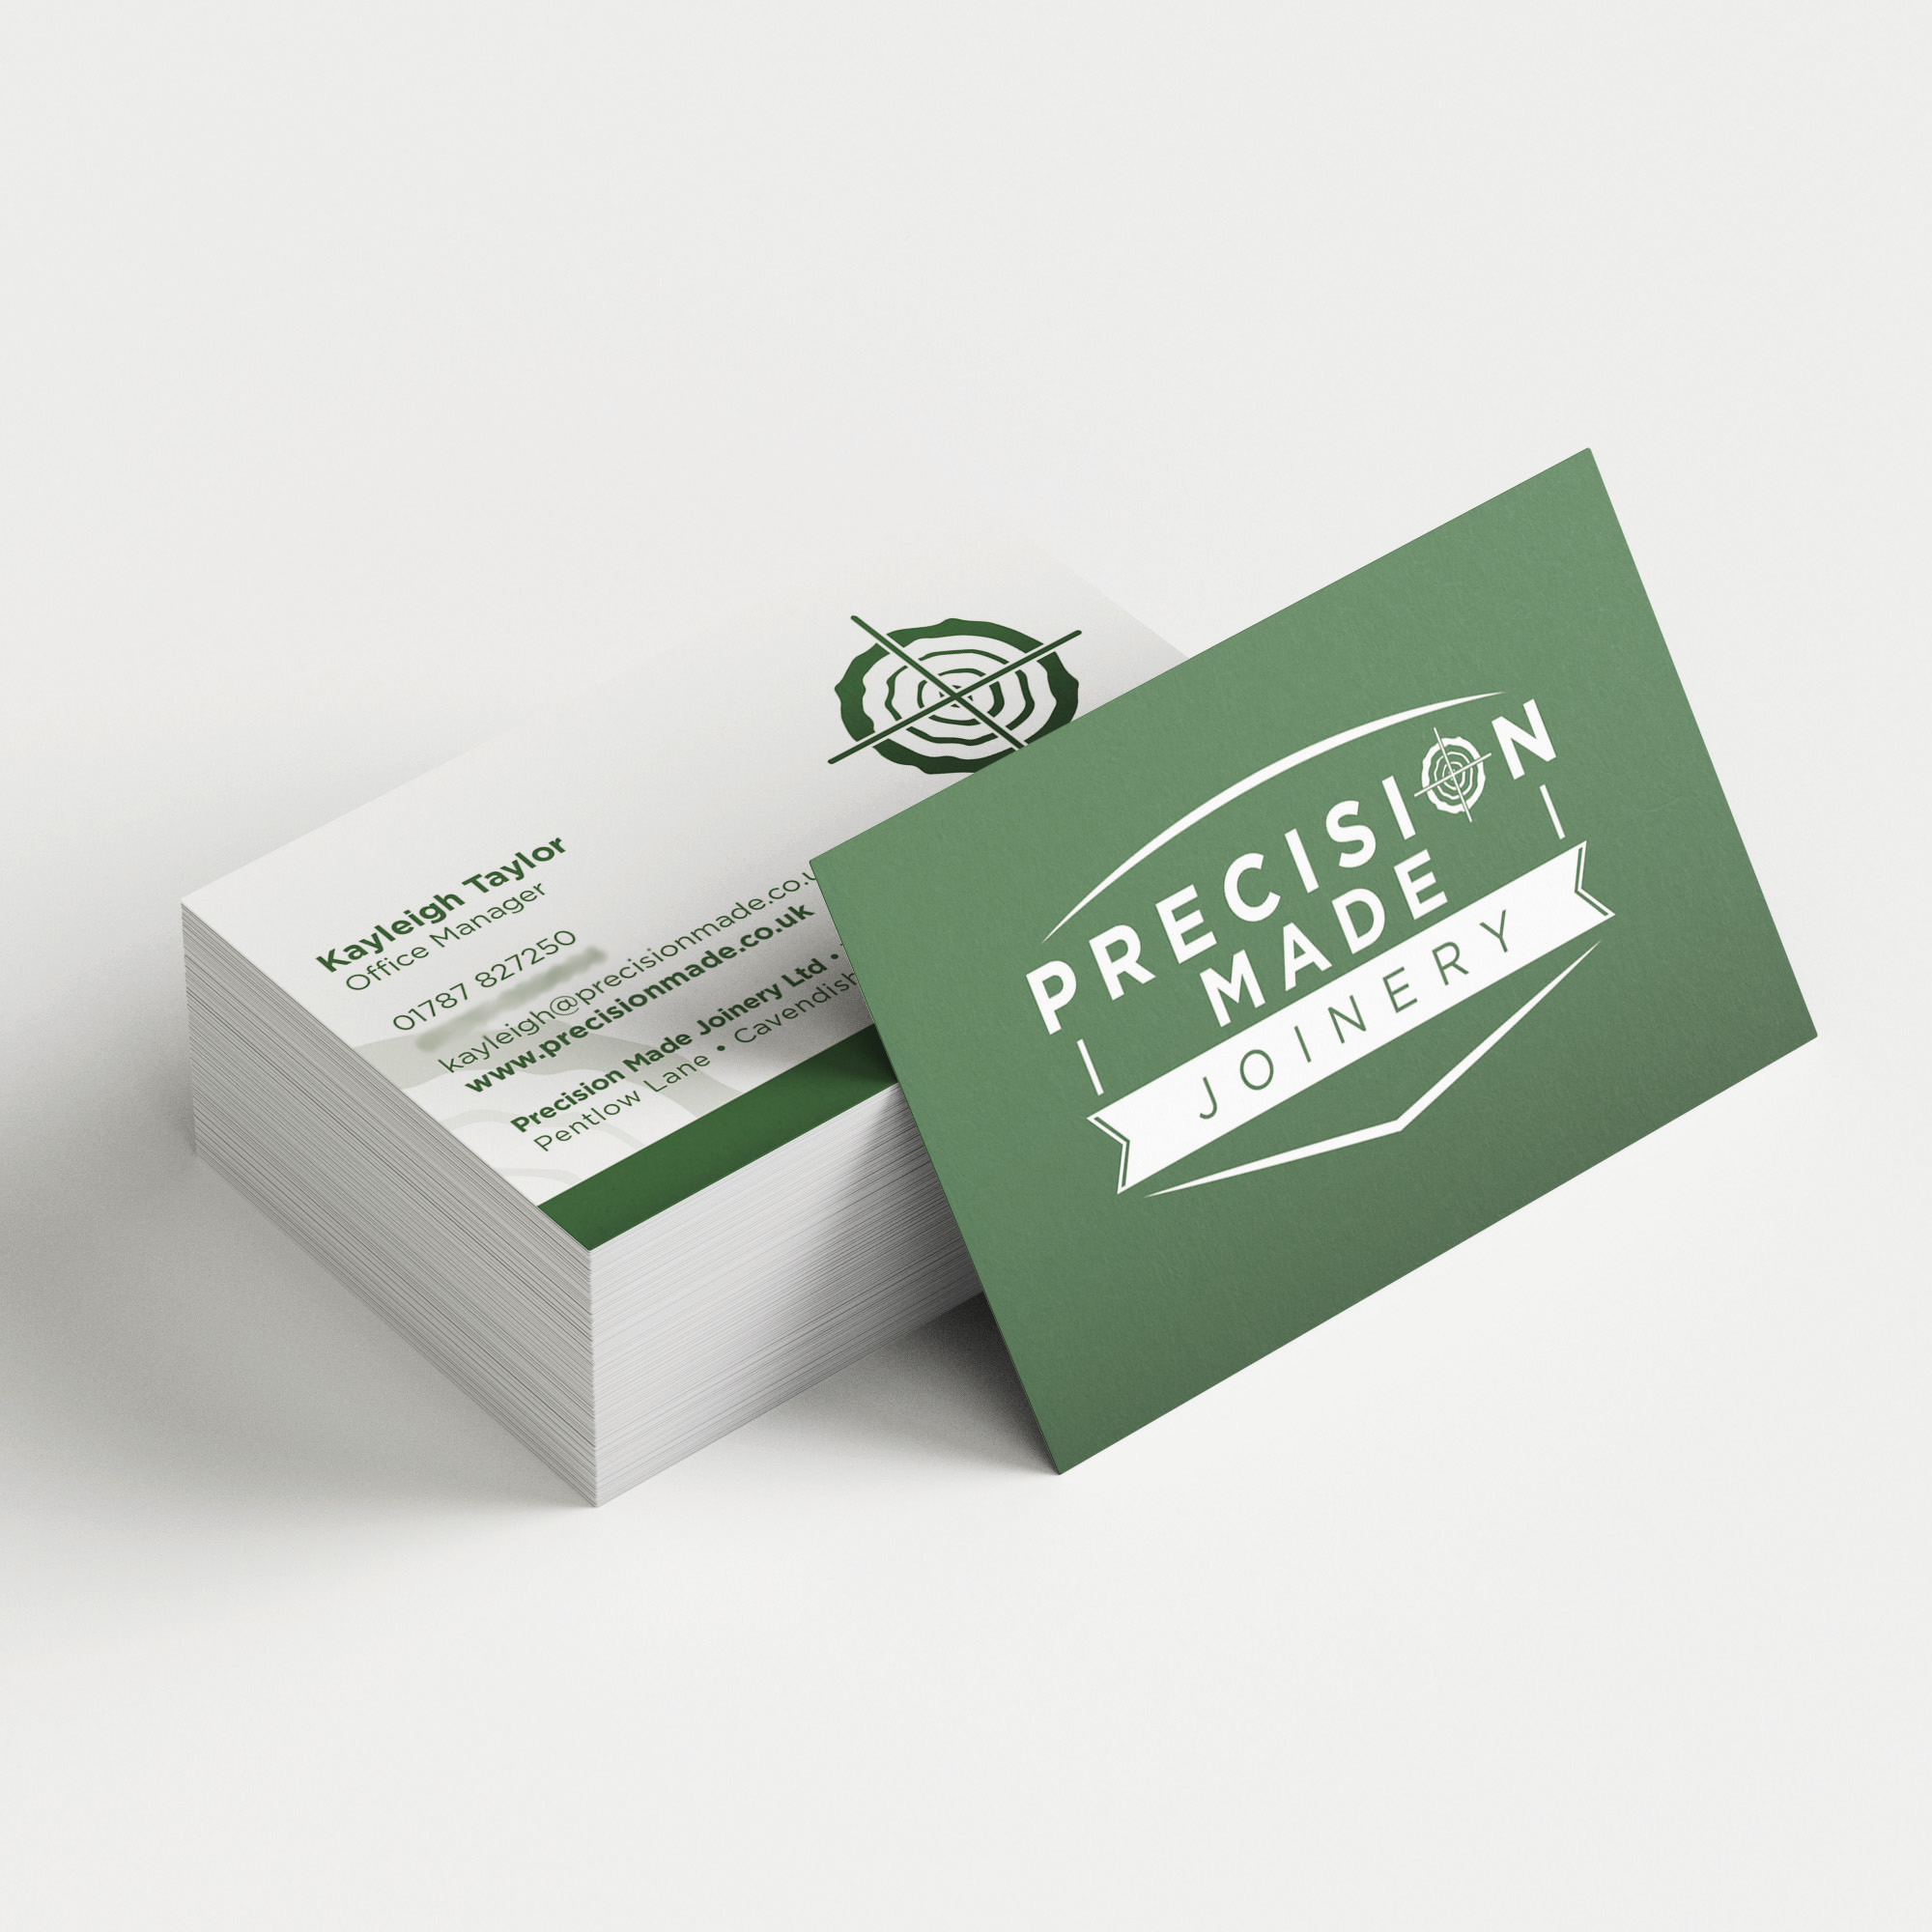 Precision Made Joinery - Business Card Design & Print